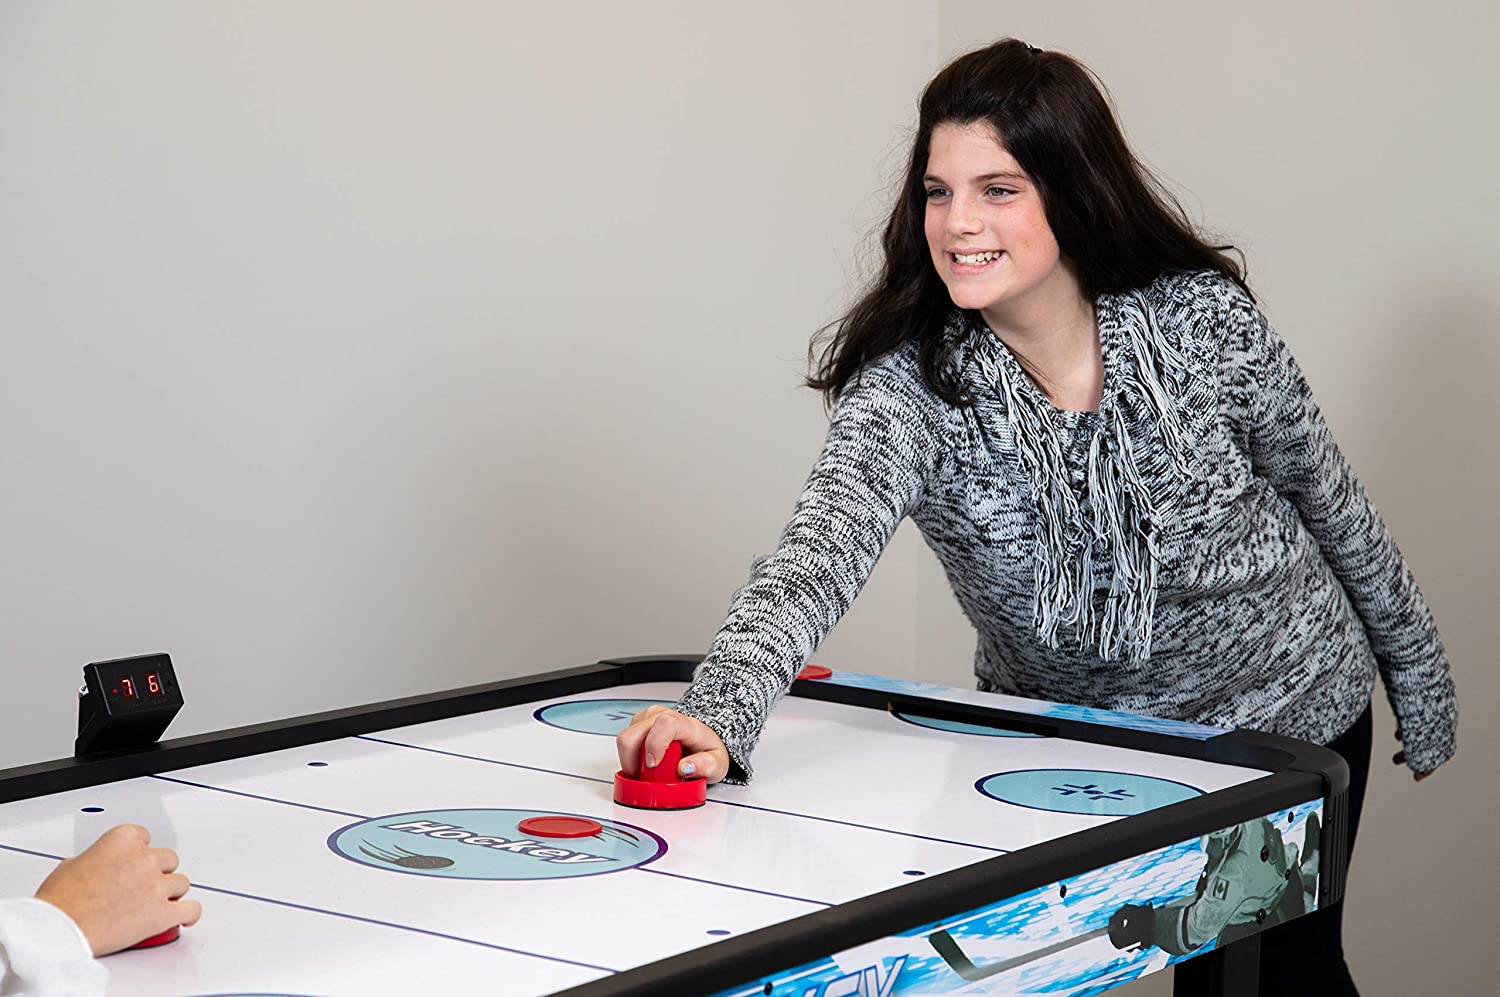 Hathaway Face-Off 5-Foot Air Hockey Game Table for Family Game Rooms with Electronic Scoring, Free Pucks &amp; Strikers